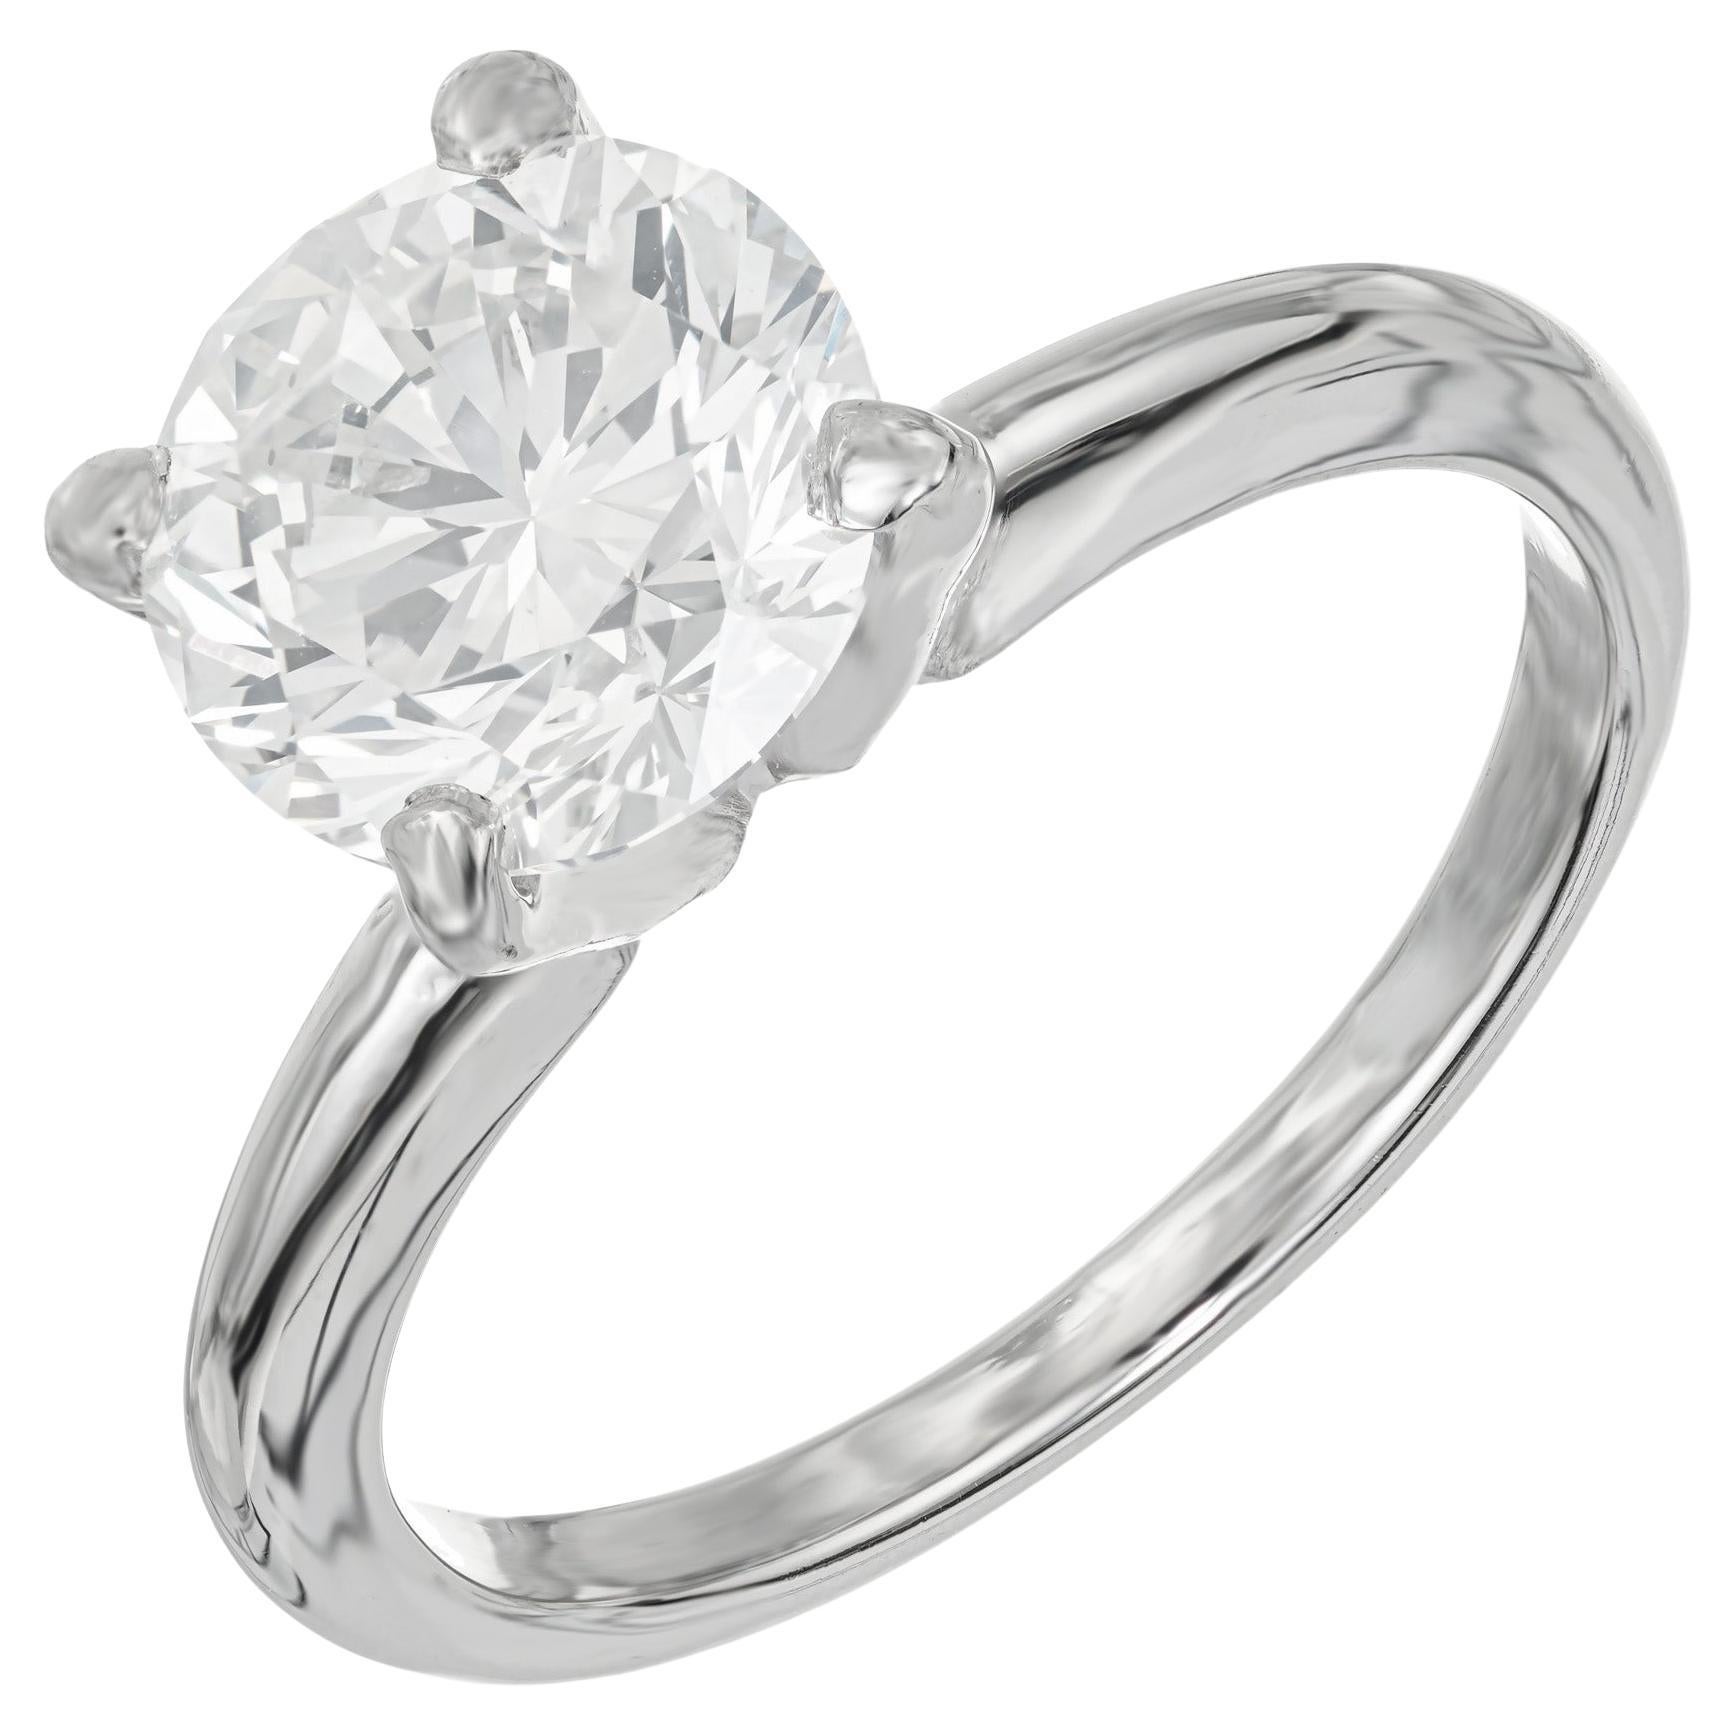 Peter Suchy GIA Certified 2.01 Carat Diamond Platinum Solitaire Engagement Ring